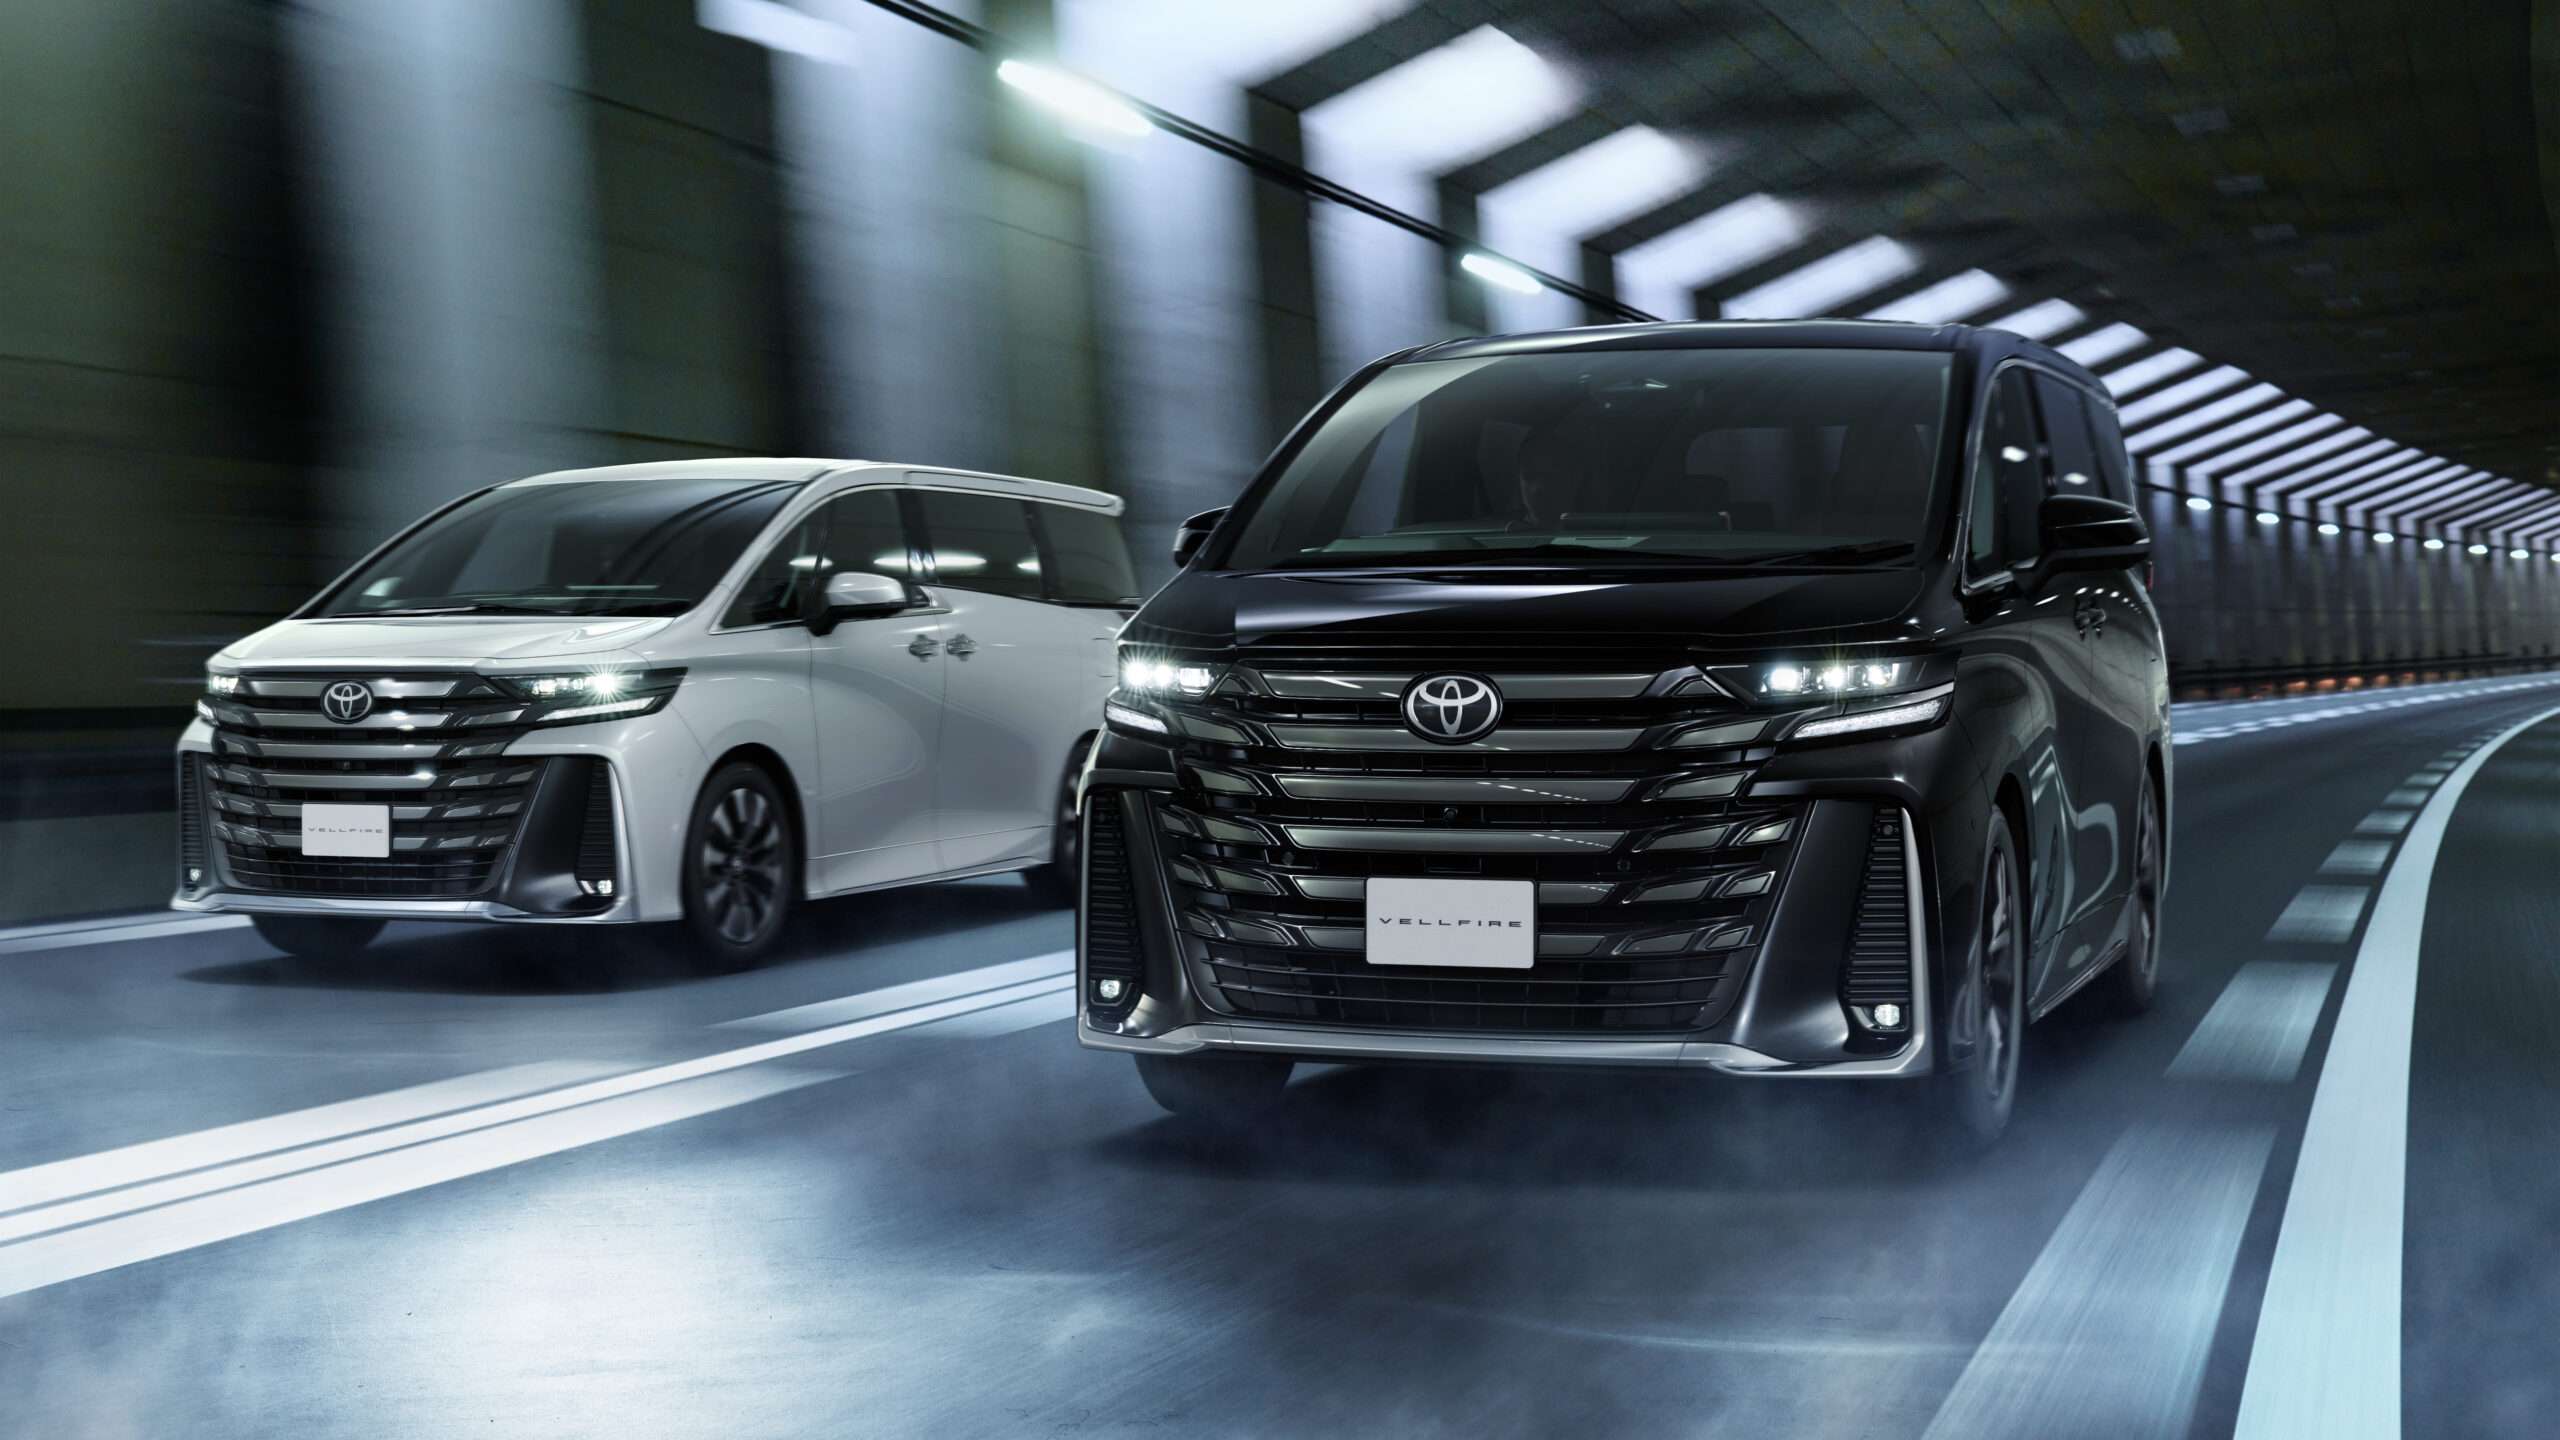 toyota has launched the new Vellfire MPV in India,